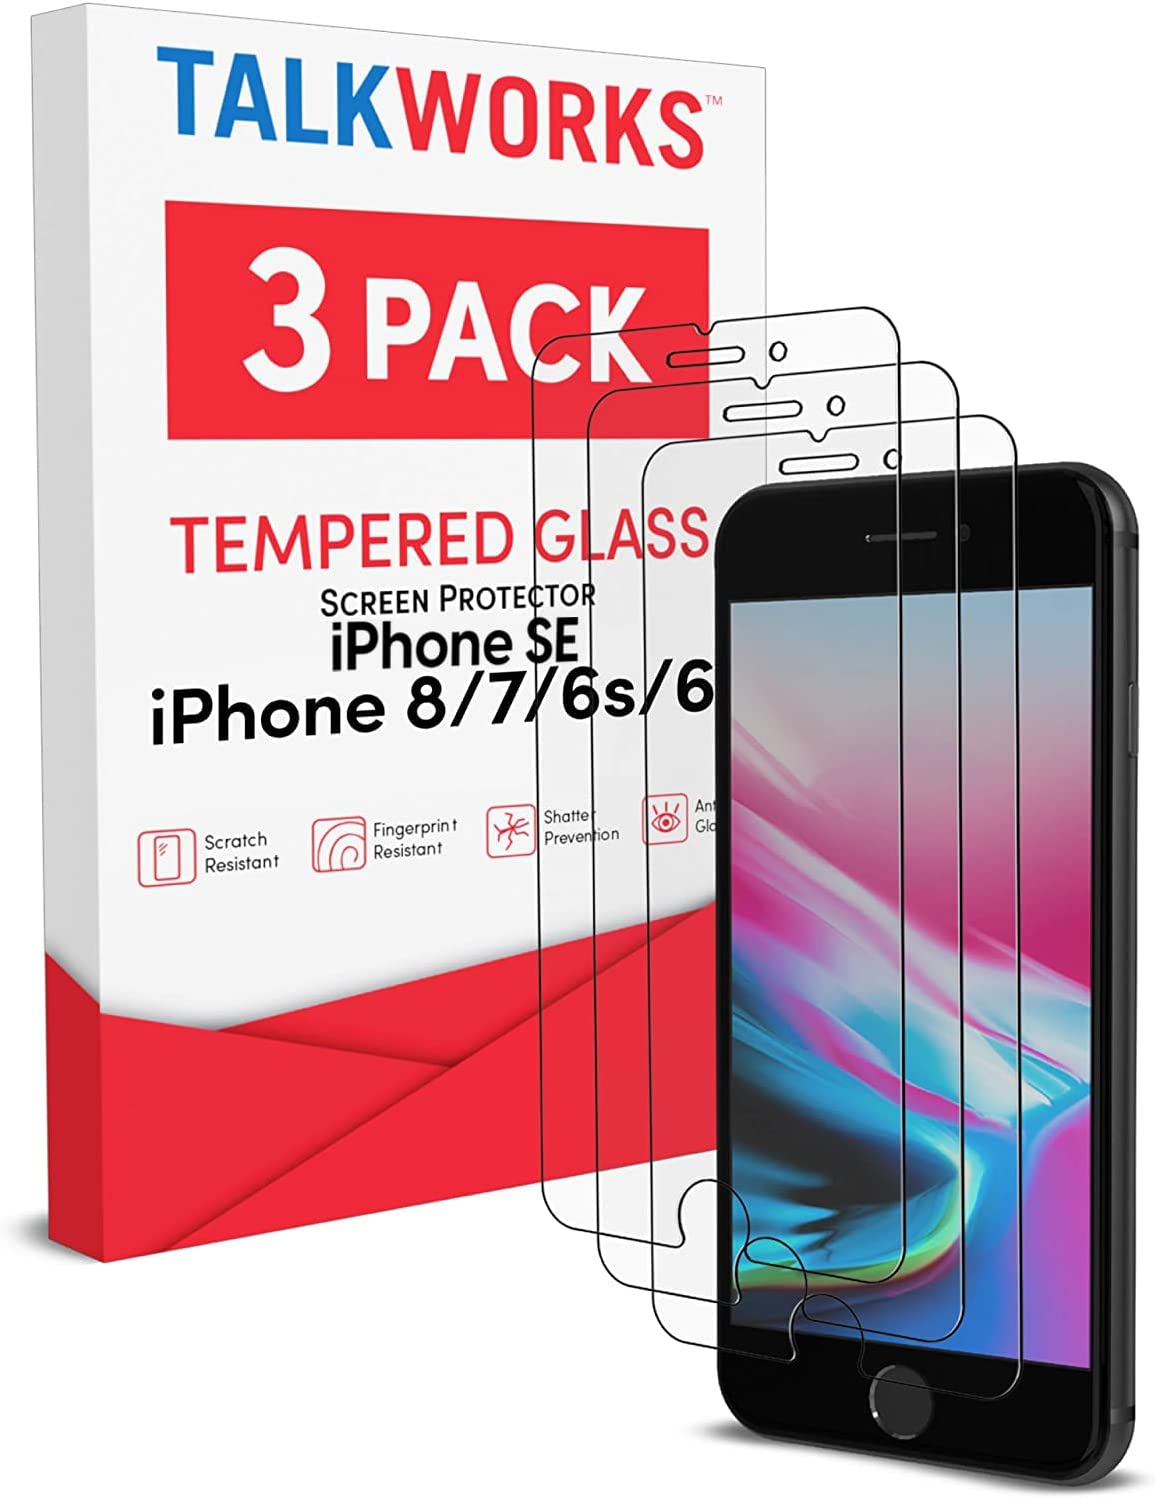 ''TALK WORKS Tempered Glass Screen Protector for IPHONE SE3/SE2/8/7/6S/6 - Case Compatible, Anti-Glar